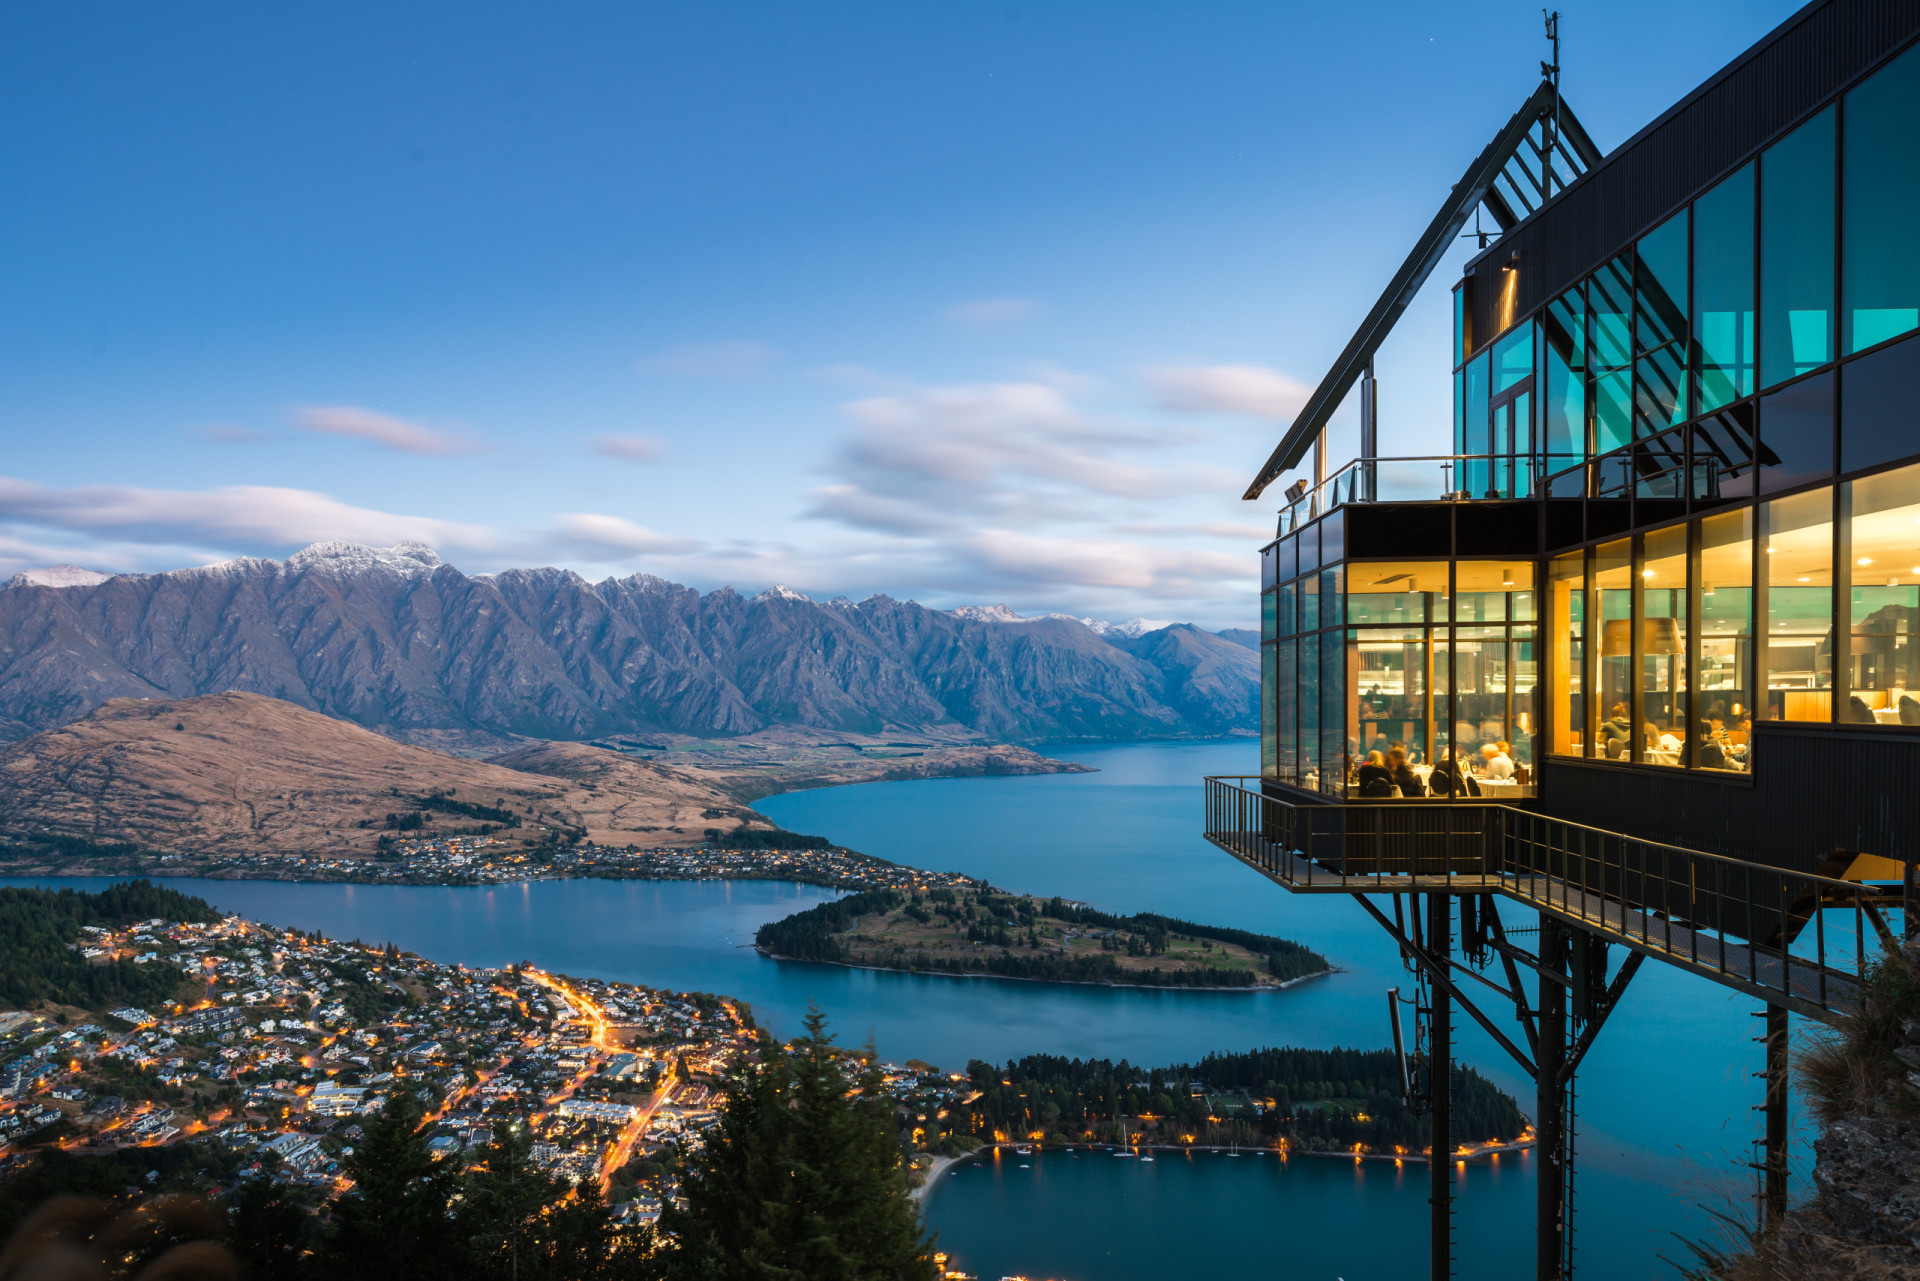 <p>Travelers visiting New Zealand have to pay an International Visitor Conservation and Tourism Levy (IVL), which costs US$23.94.</p><p><a href="https://www.msn.com/en-my/community/channel/vid-7xx8mnucu55yw63we9va2gwr7uihbxwc68fxqp25x6tg4ftibpra?cvid=94631541bc0f4f89bfd59158d696ad7e">Follow us and access great exclusive content every day</a></p>